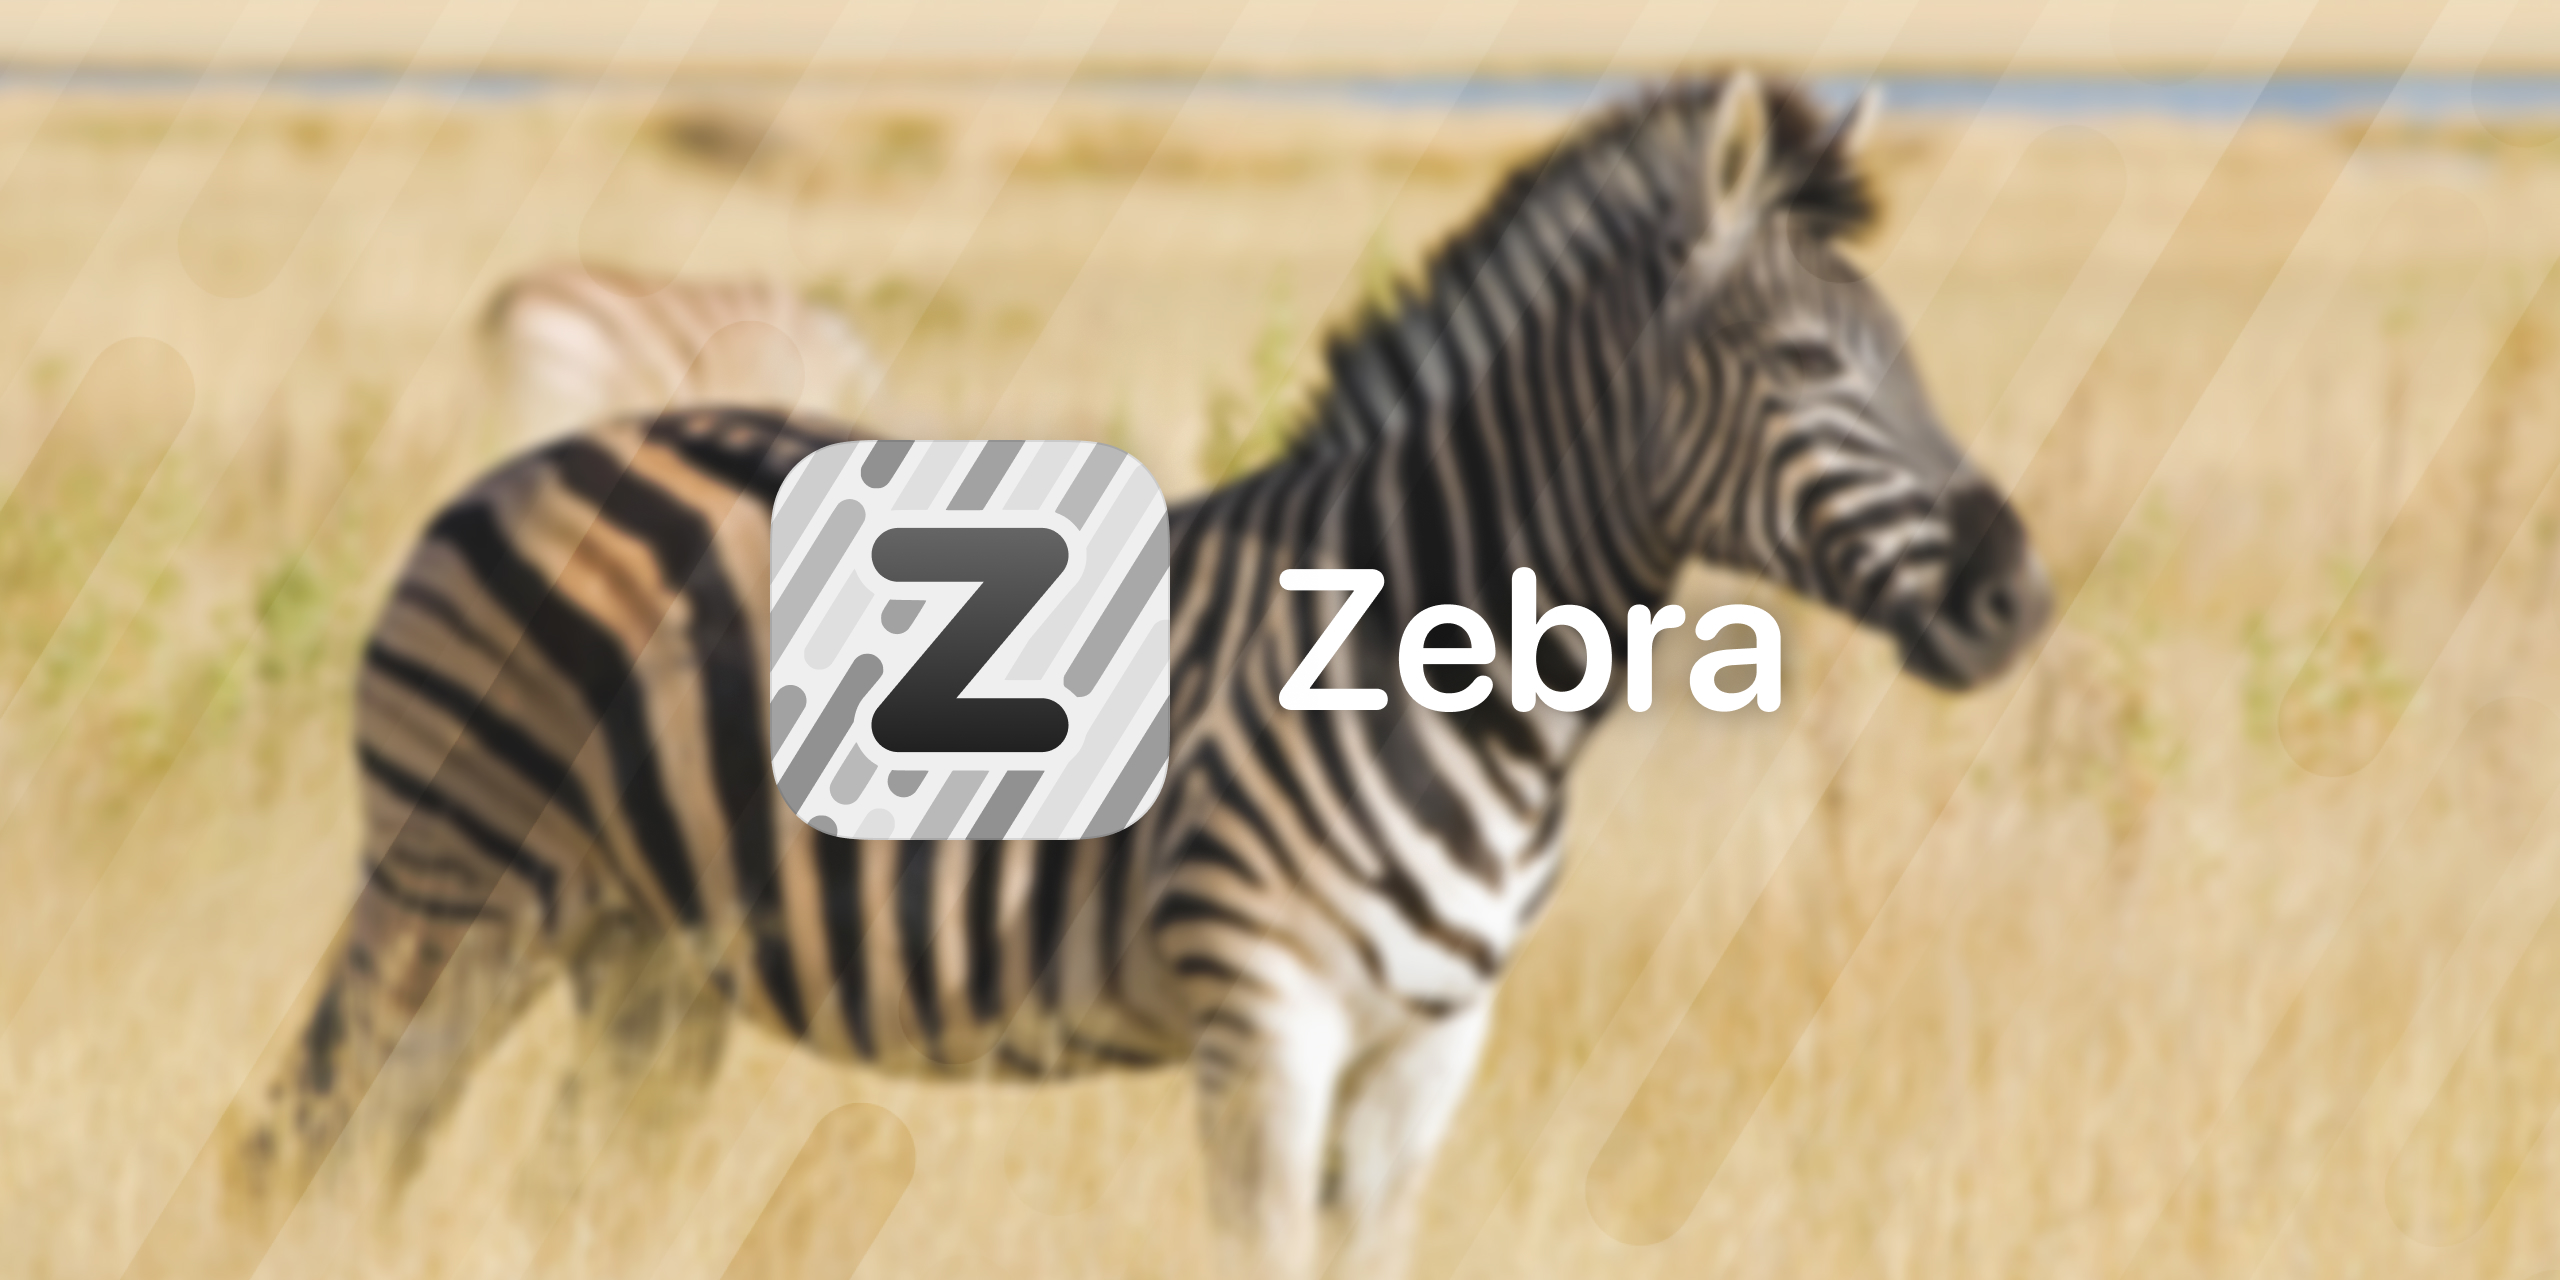 Zebra package manager for jailbroken devices updated to v1.1.32 with bug fixes & improvements